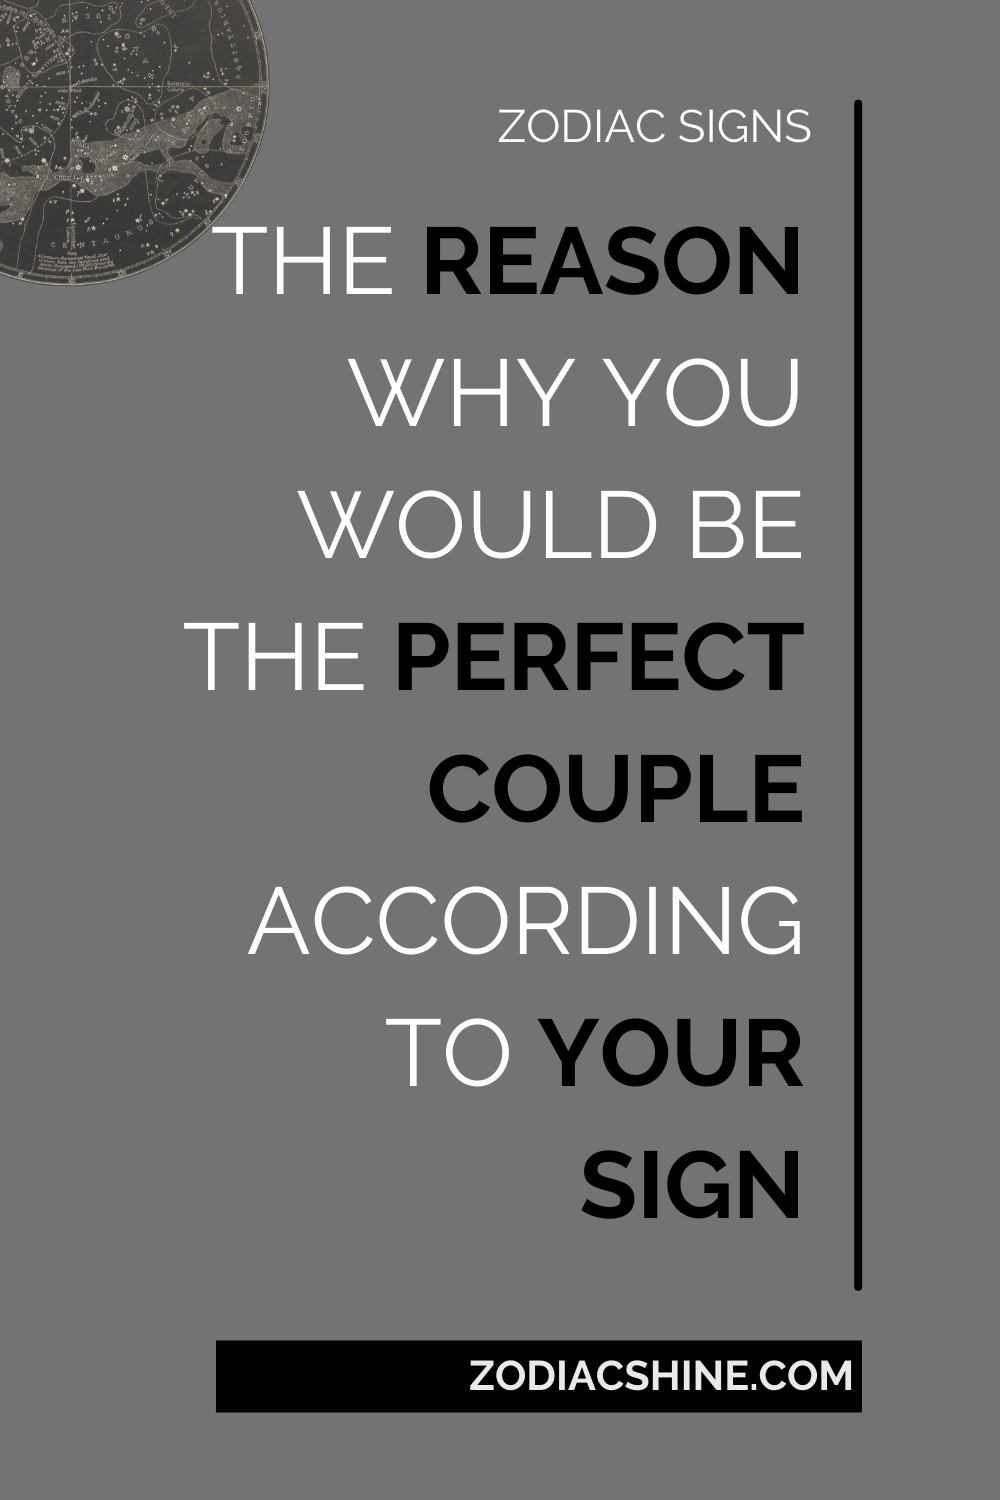 The Reason Why You Would Be The Perfect Couple According To Your Sign